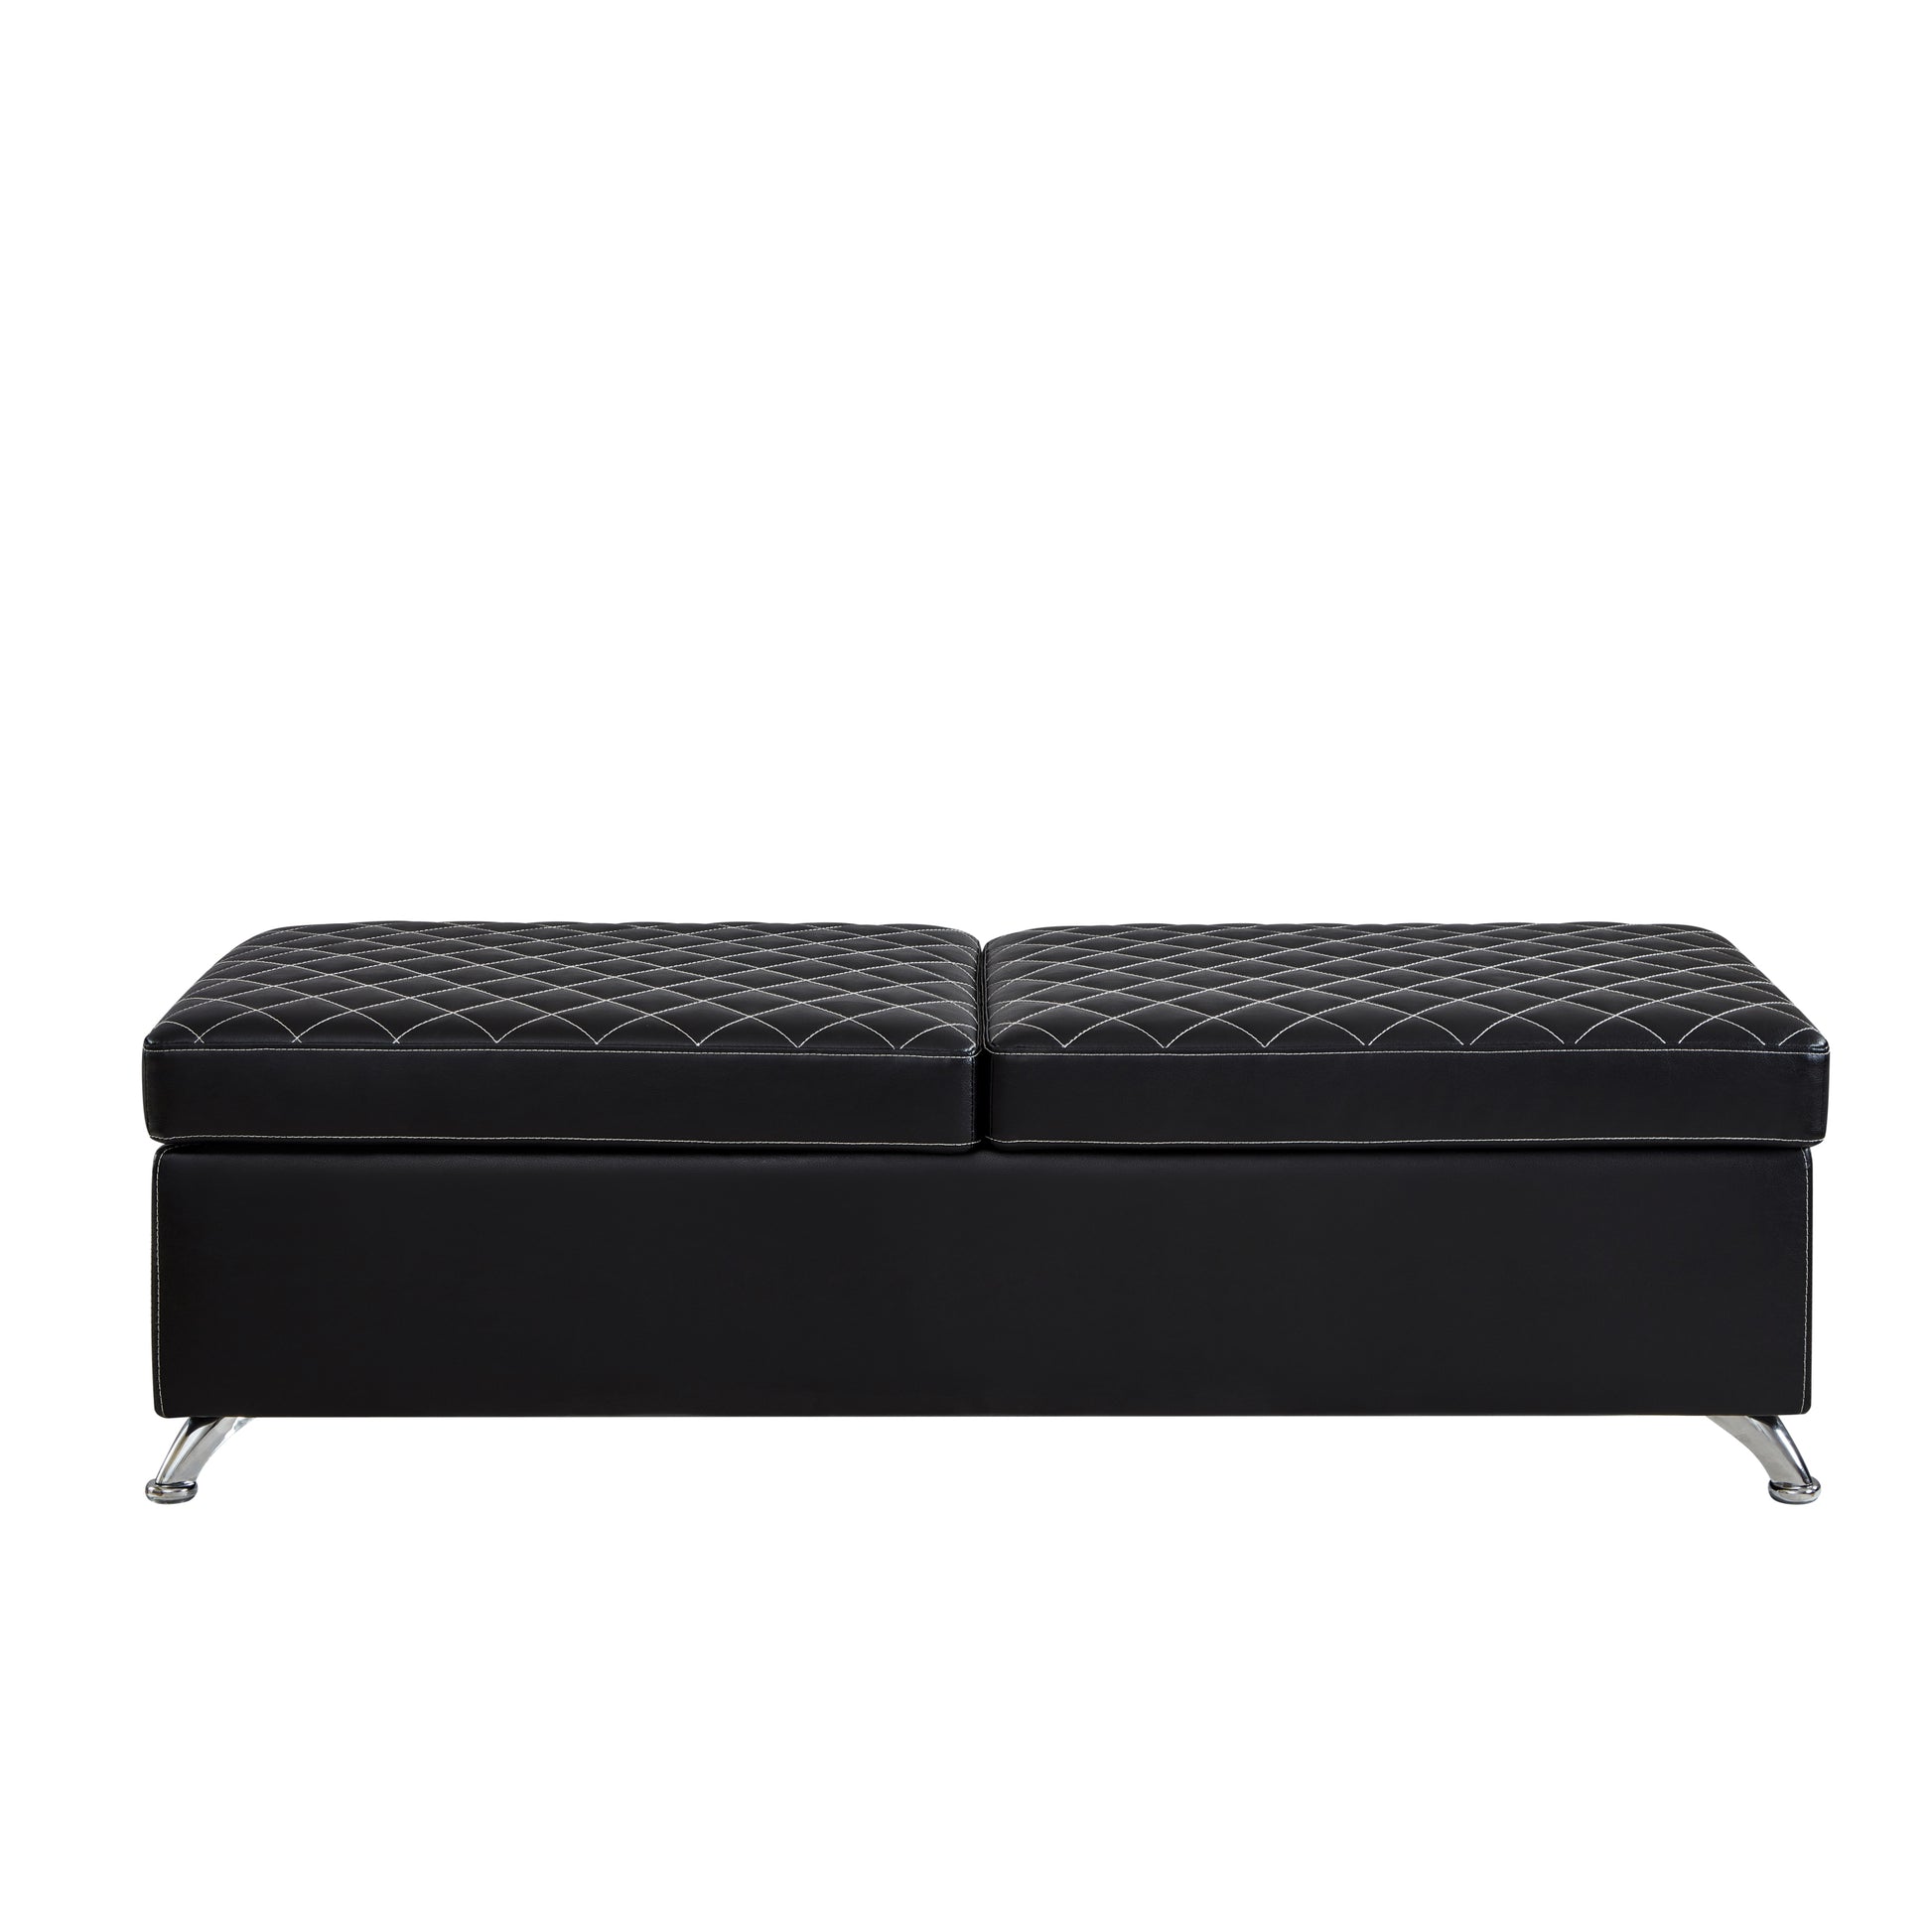 56.7" Bed Bench with Storage Black Leather black-pu